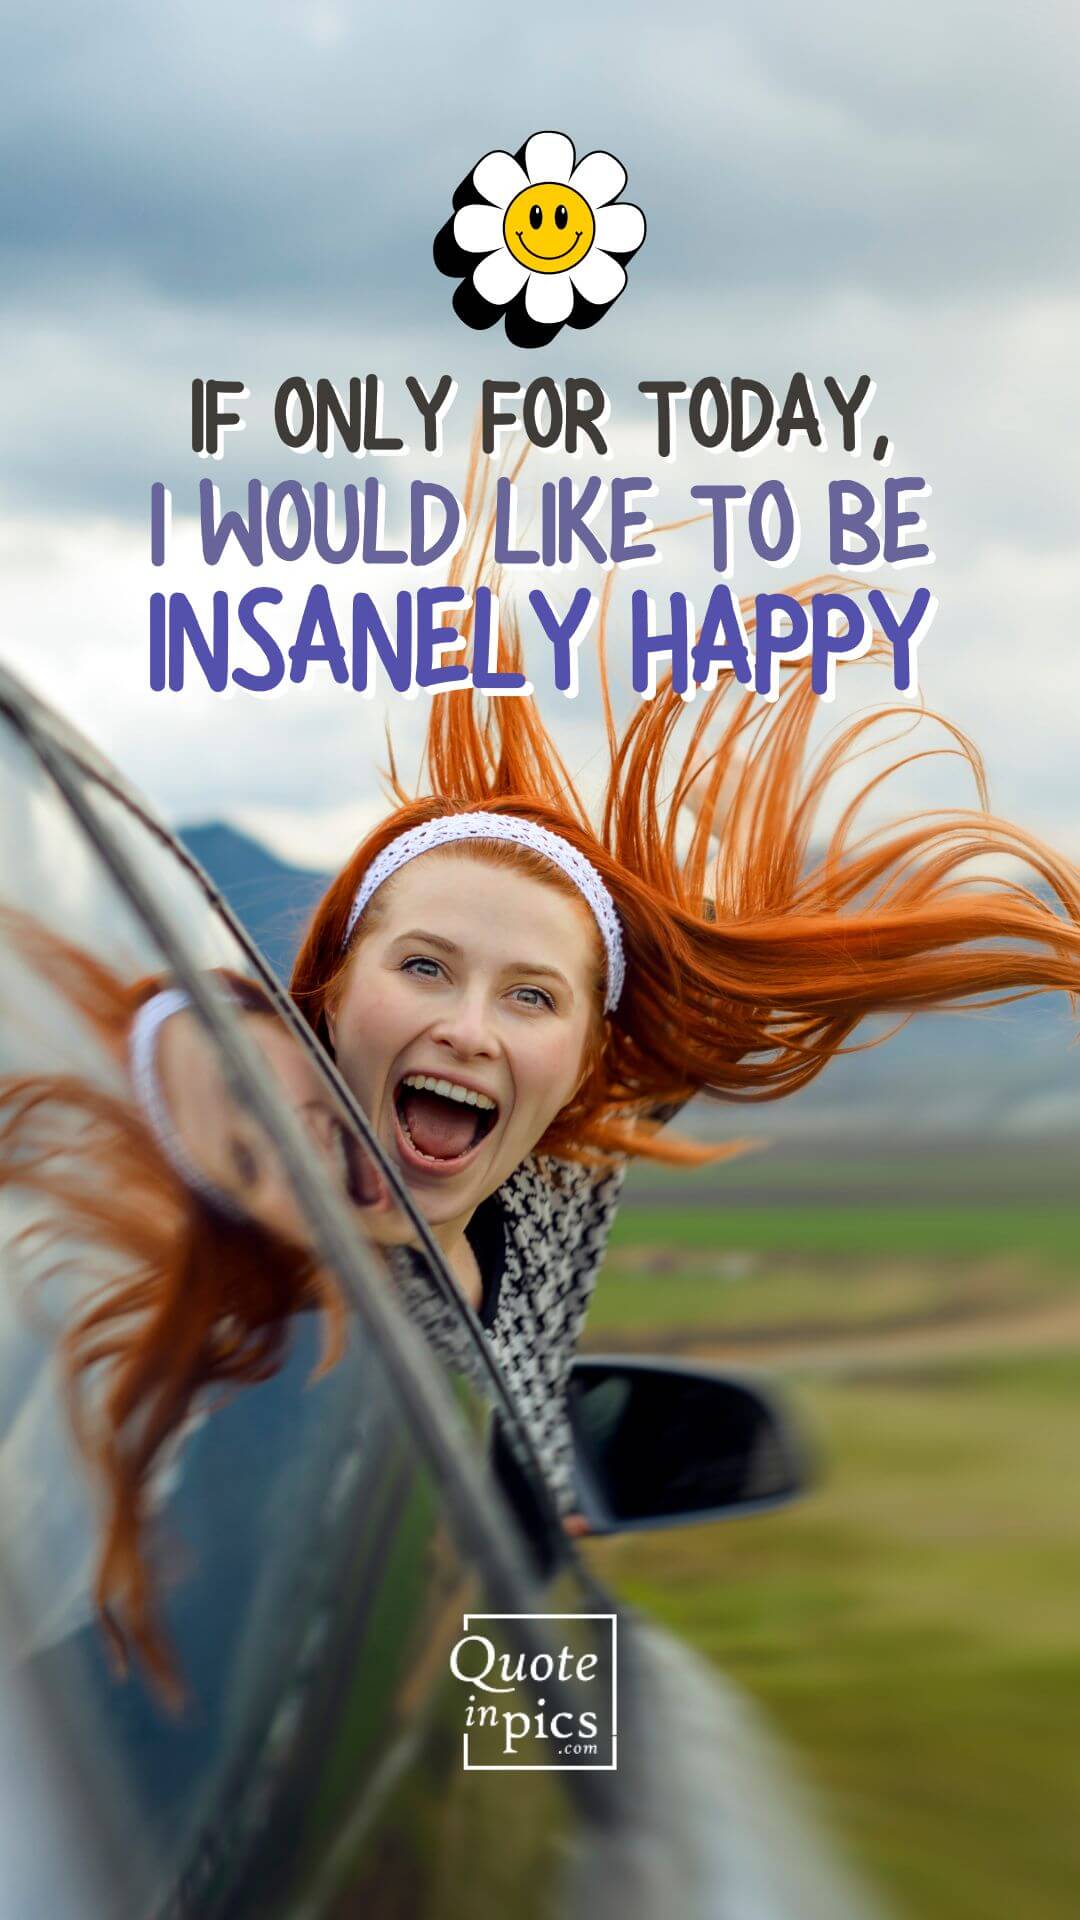 If only for today, I would like to be insanely happy